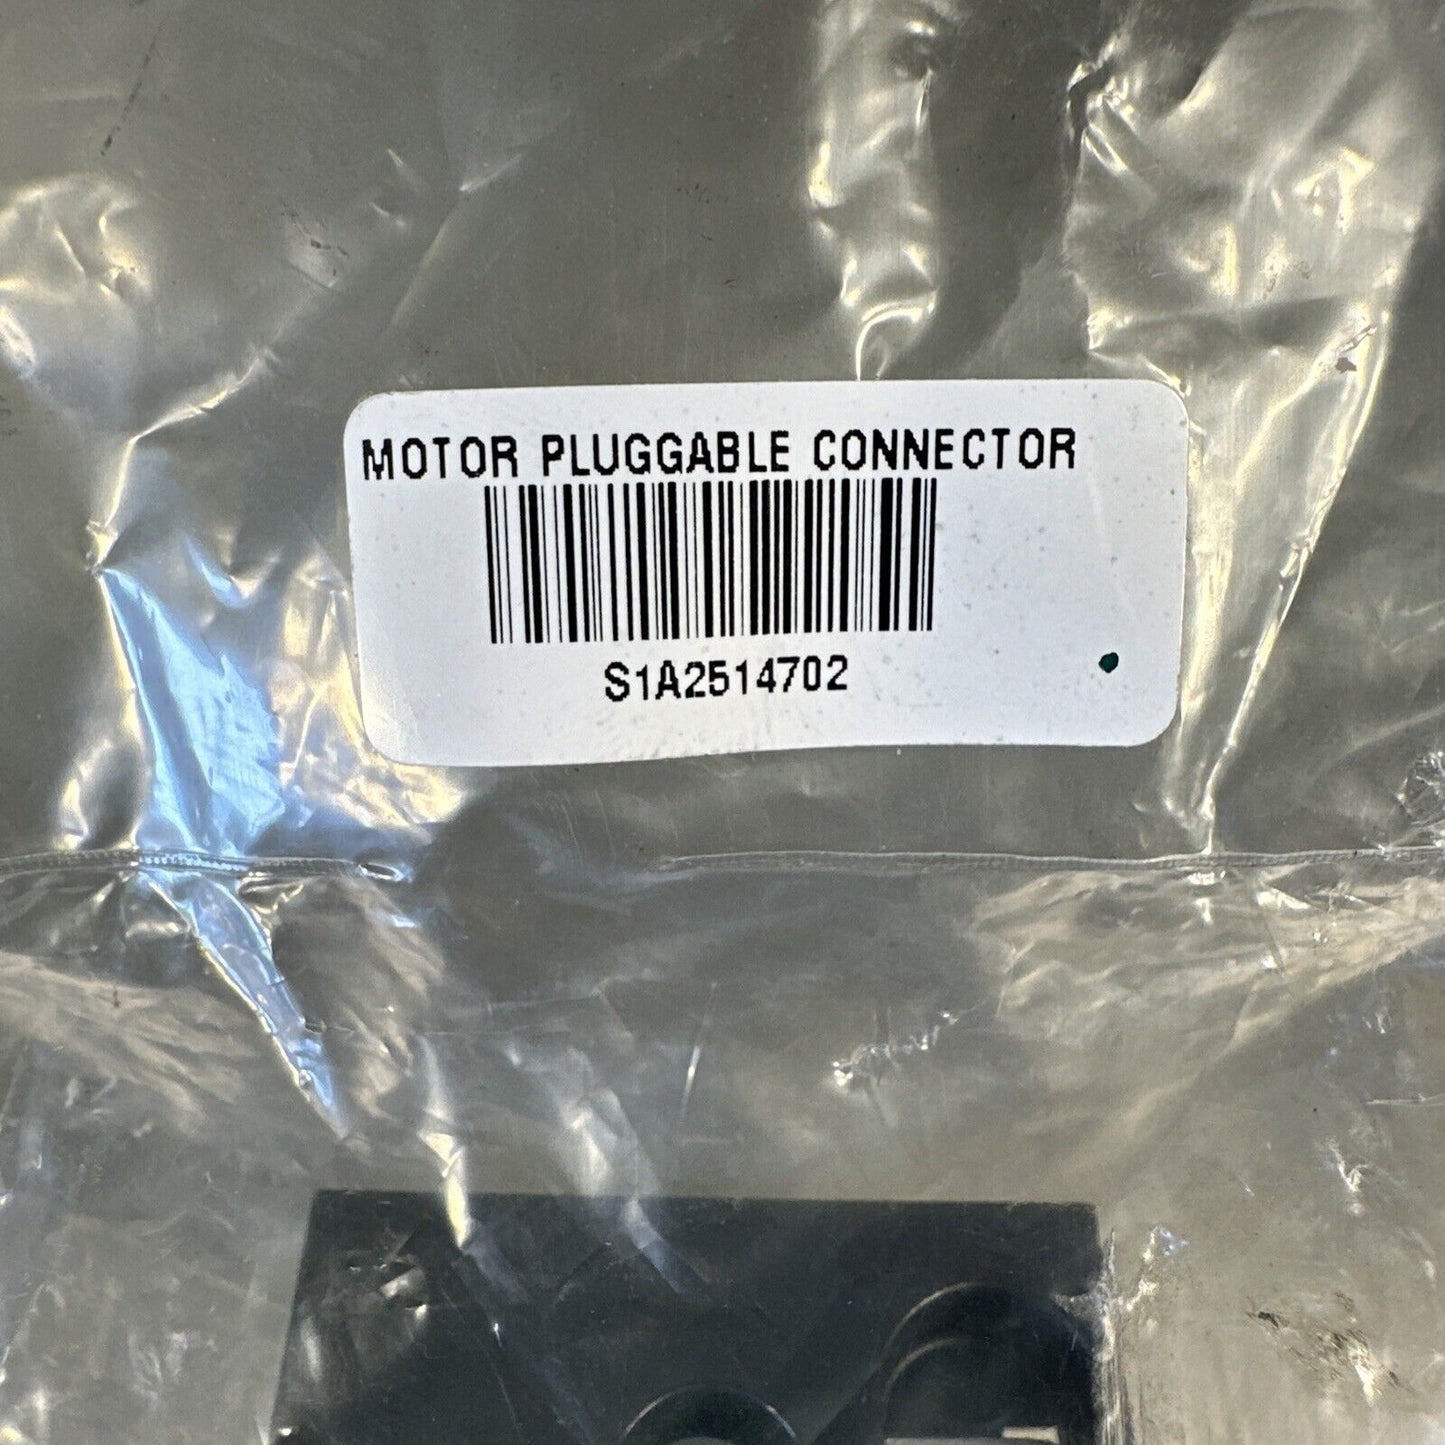 PBE Motor Pluggable Connector S1A2514702 (BIN-1.5.5)